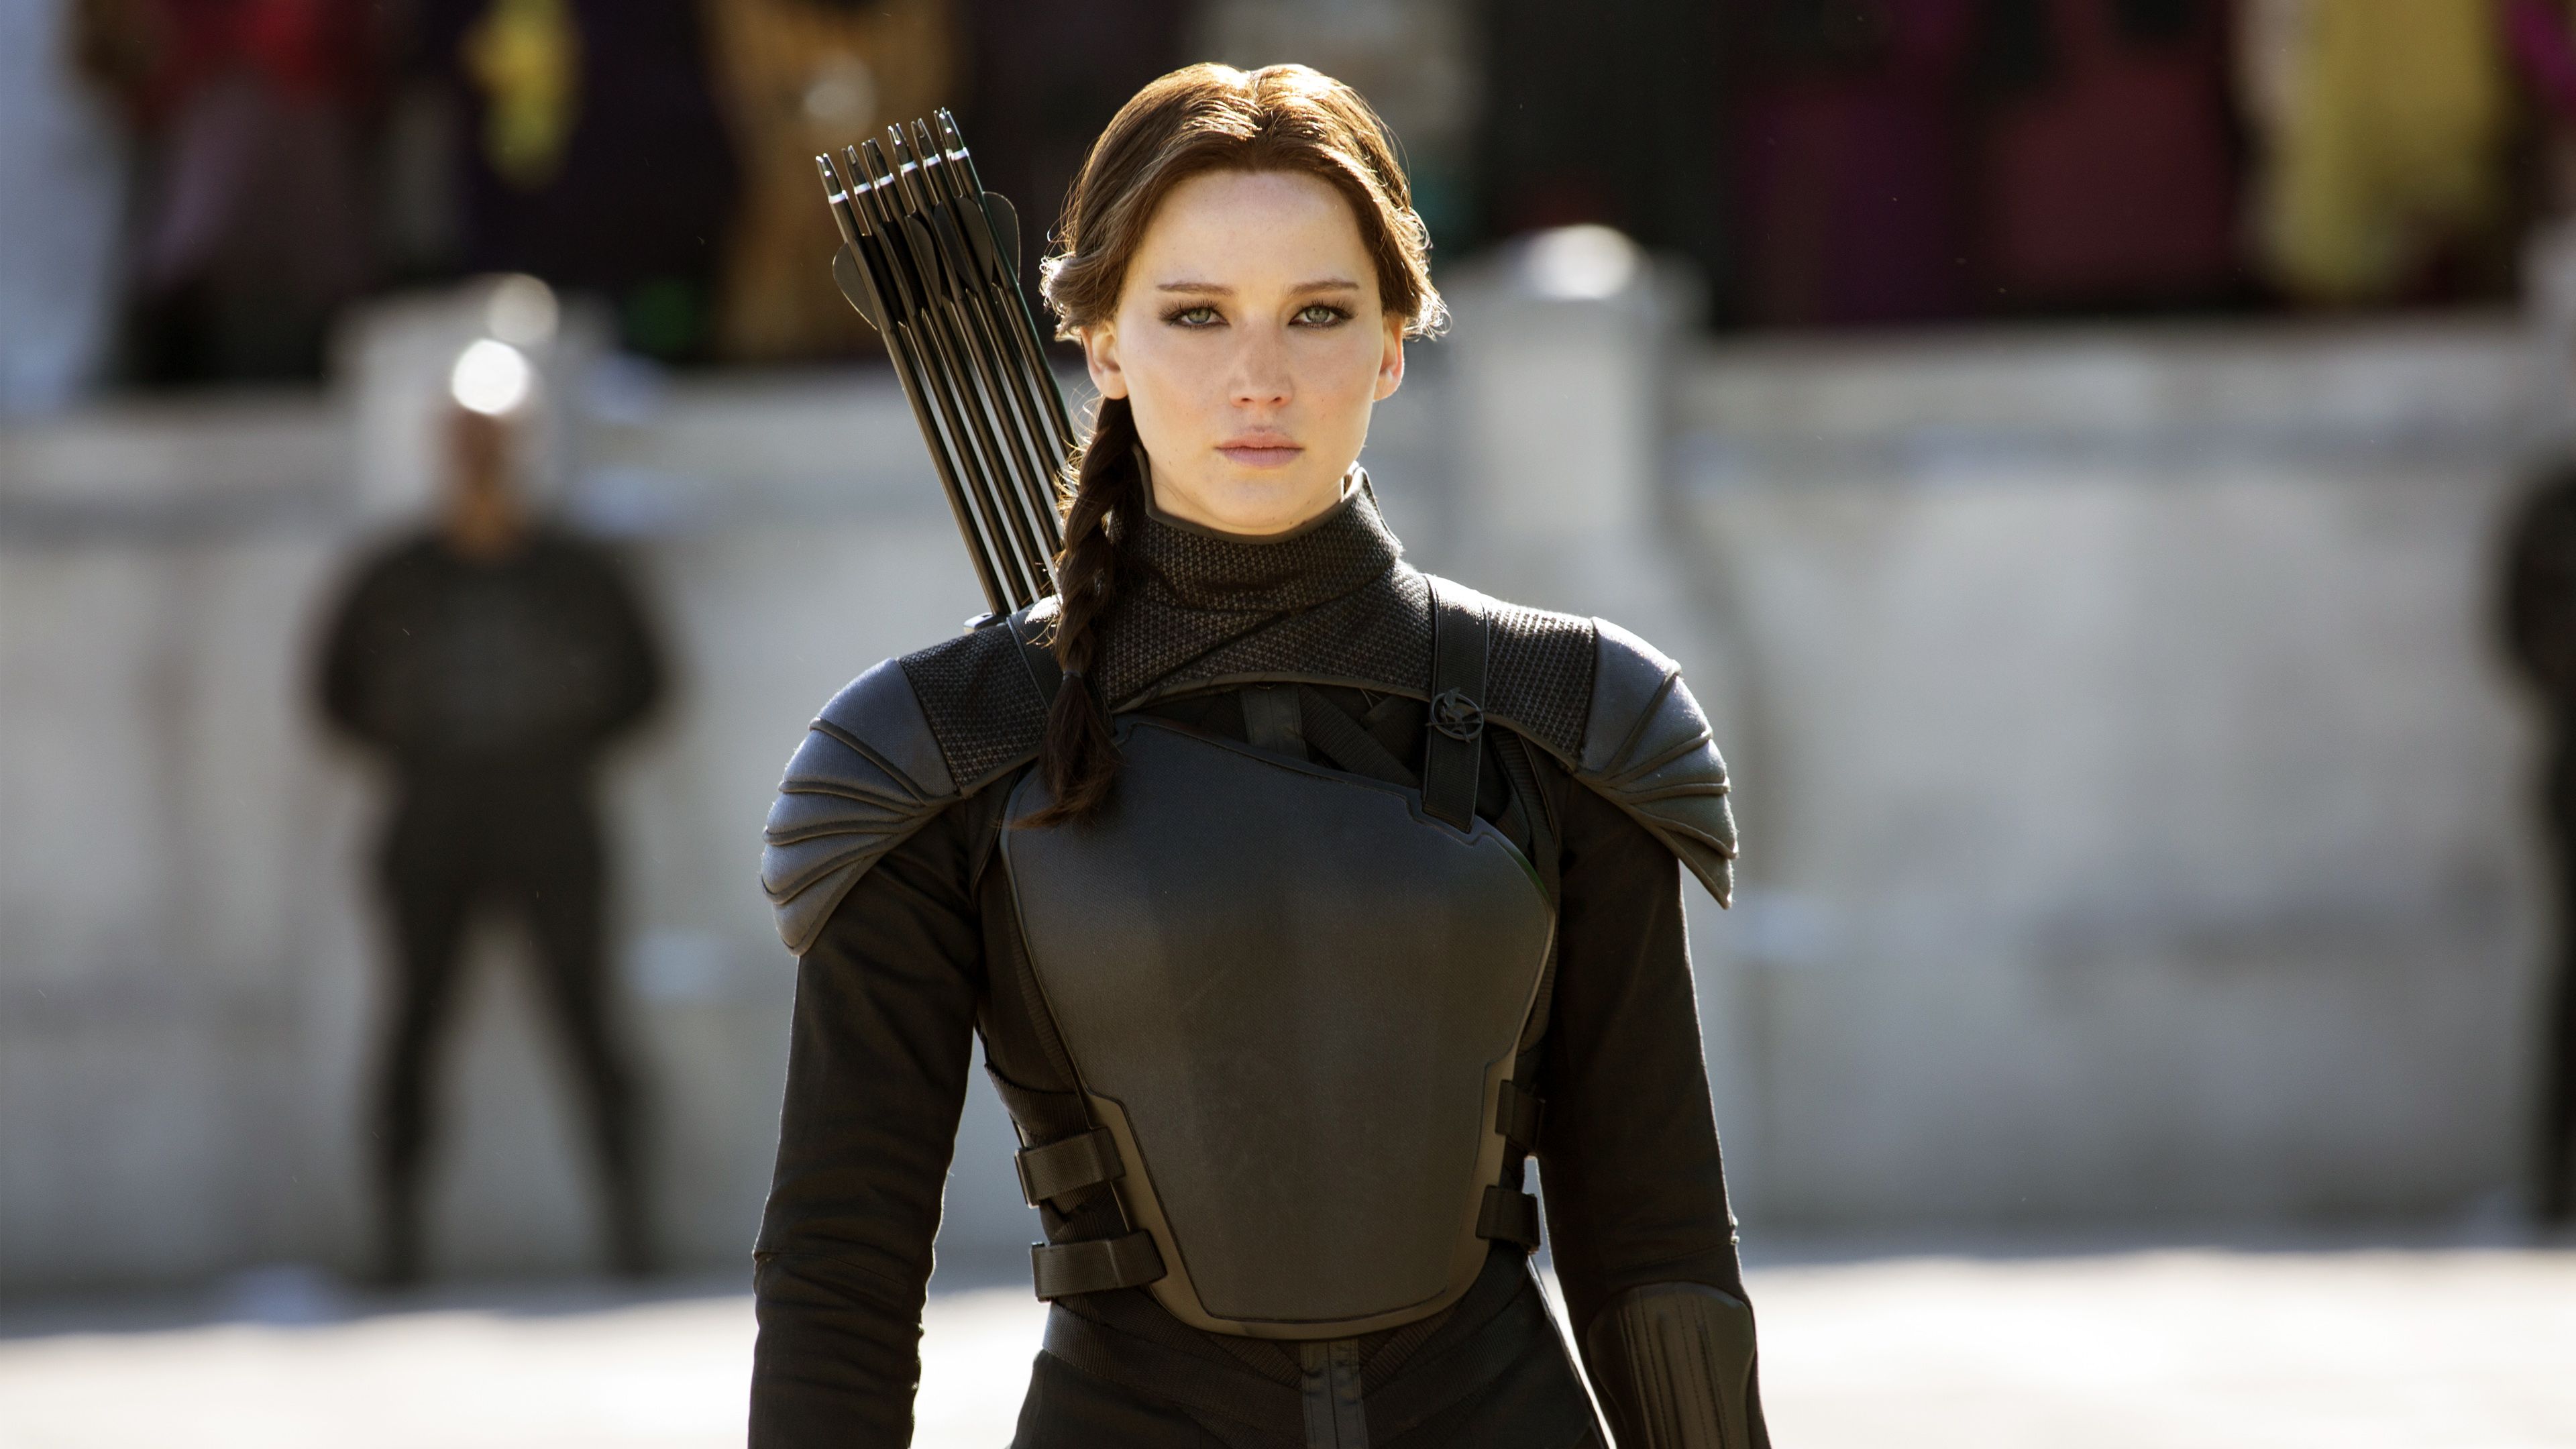 Katniss 4K wallpaper for your desktop or mobile screen free and easy to download